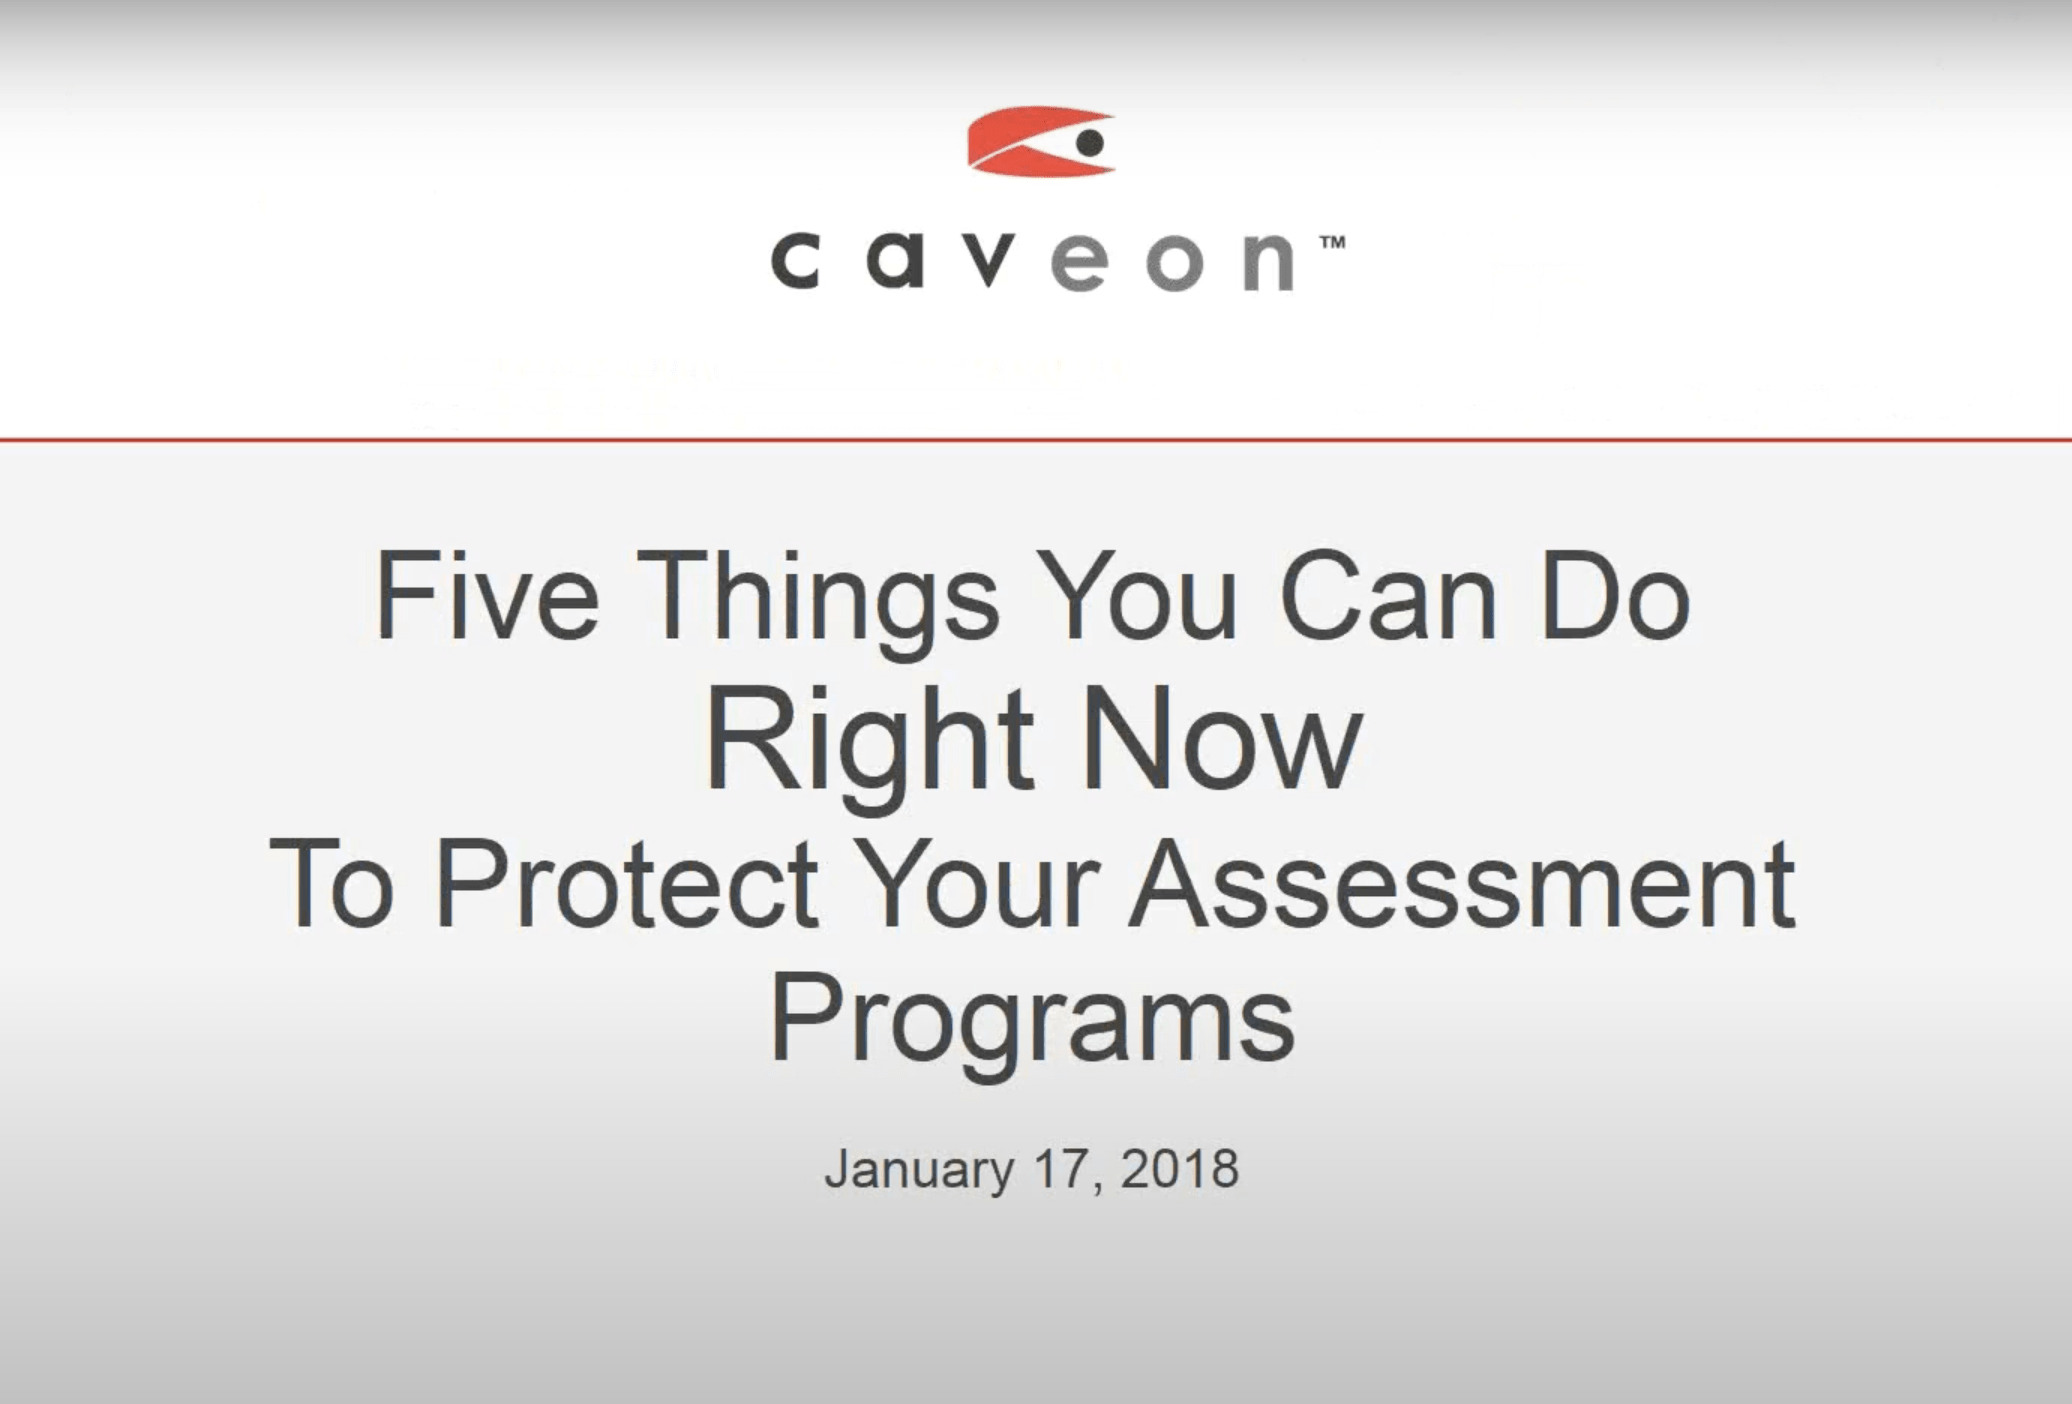 Five Things to Protect Your Assessment Program